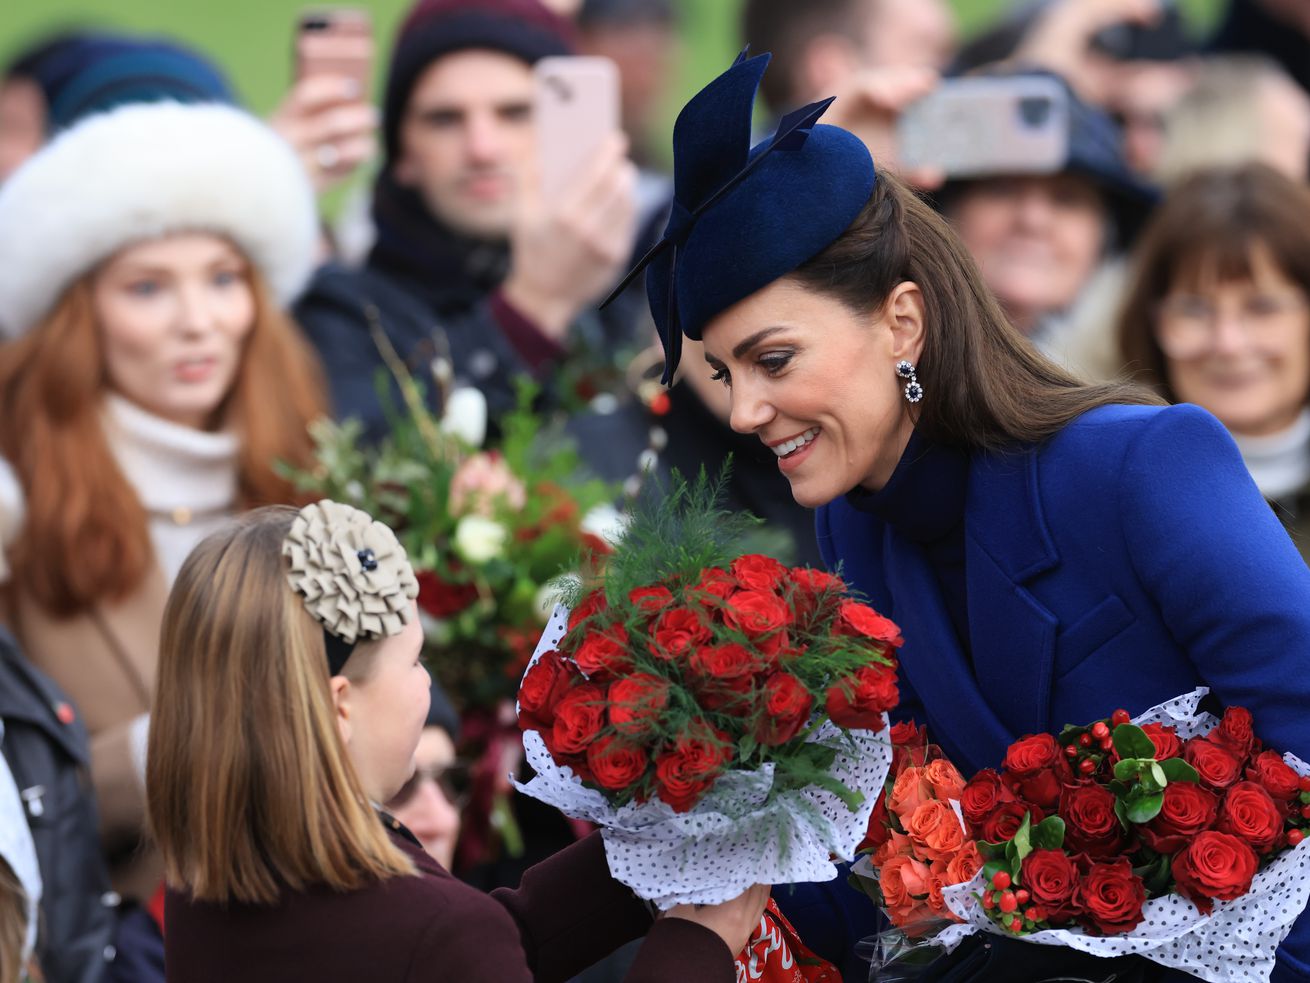 Princess Kate, in a royal blue coat and hat, bends down to accept a bouquet of red roses from a little girl amid a crowd of on-lookers.